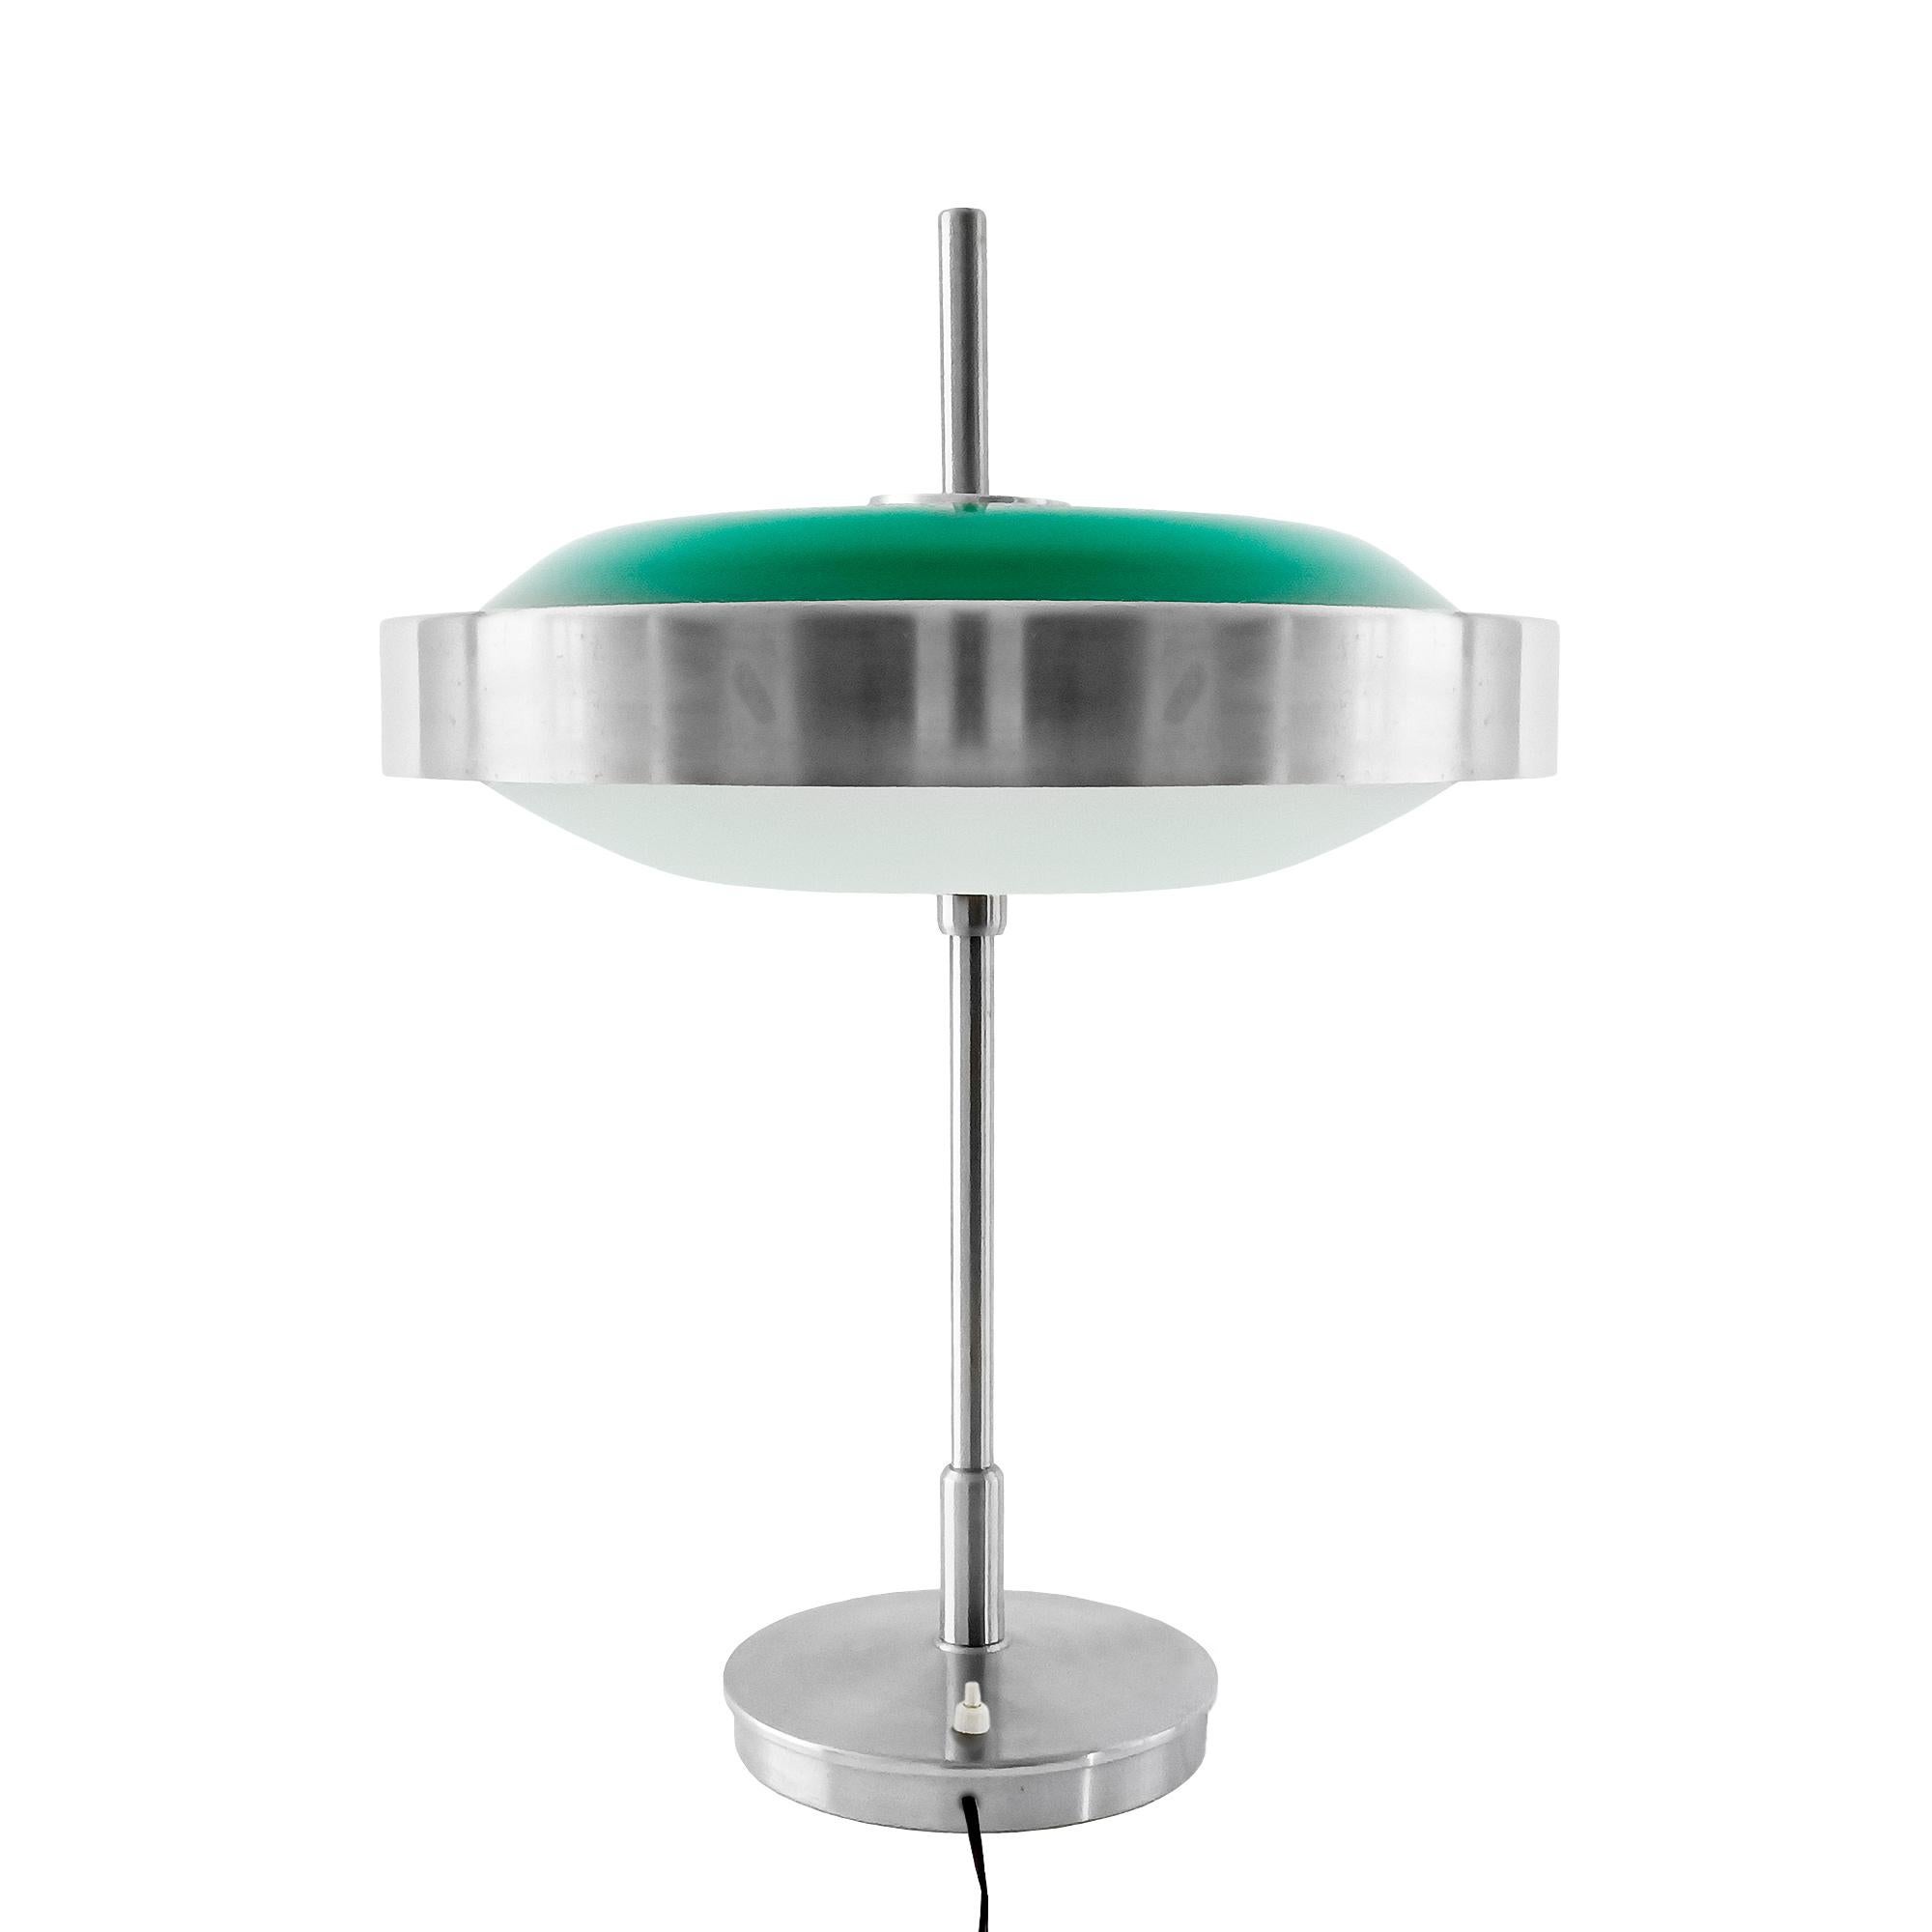 Table lamp in brushed steel, diffusers in white opaline and green opaline, three points of light.
Design: Oscar Torlasco for Lumi.
Milan, Italy, 1960.